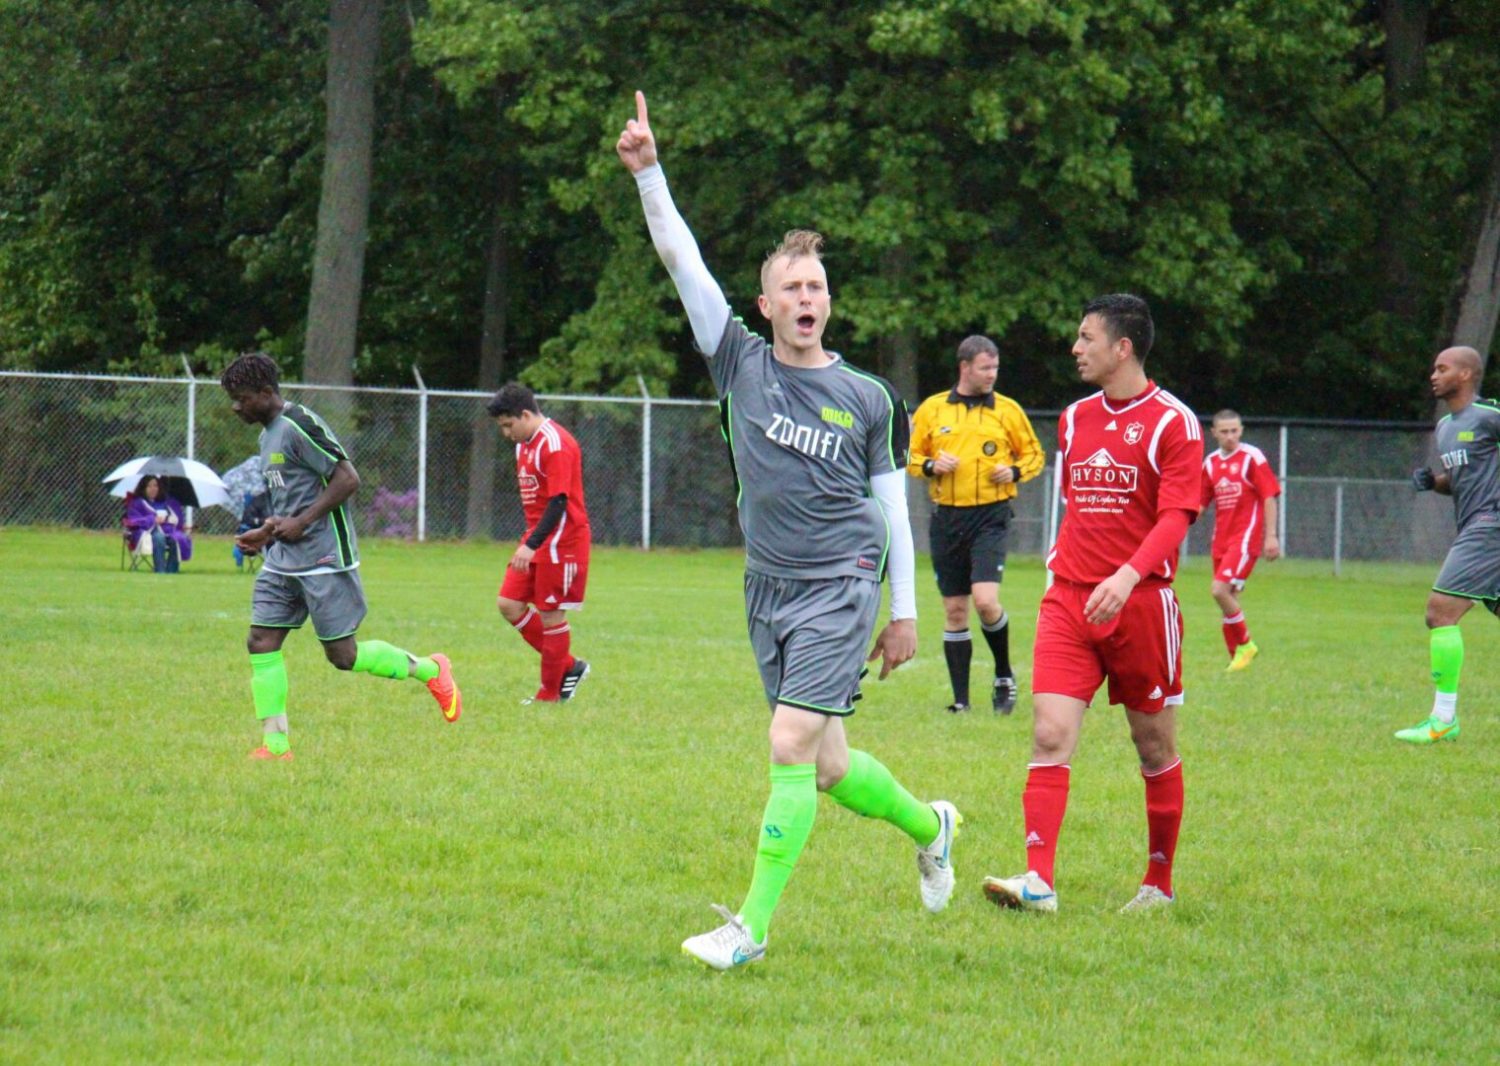 Muskegon Risers brave the rain, beat CKS Warta 3-0 for their third straight win